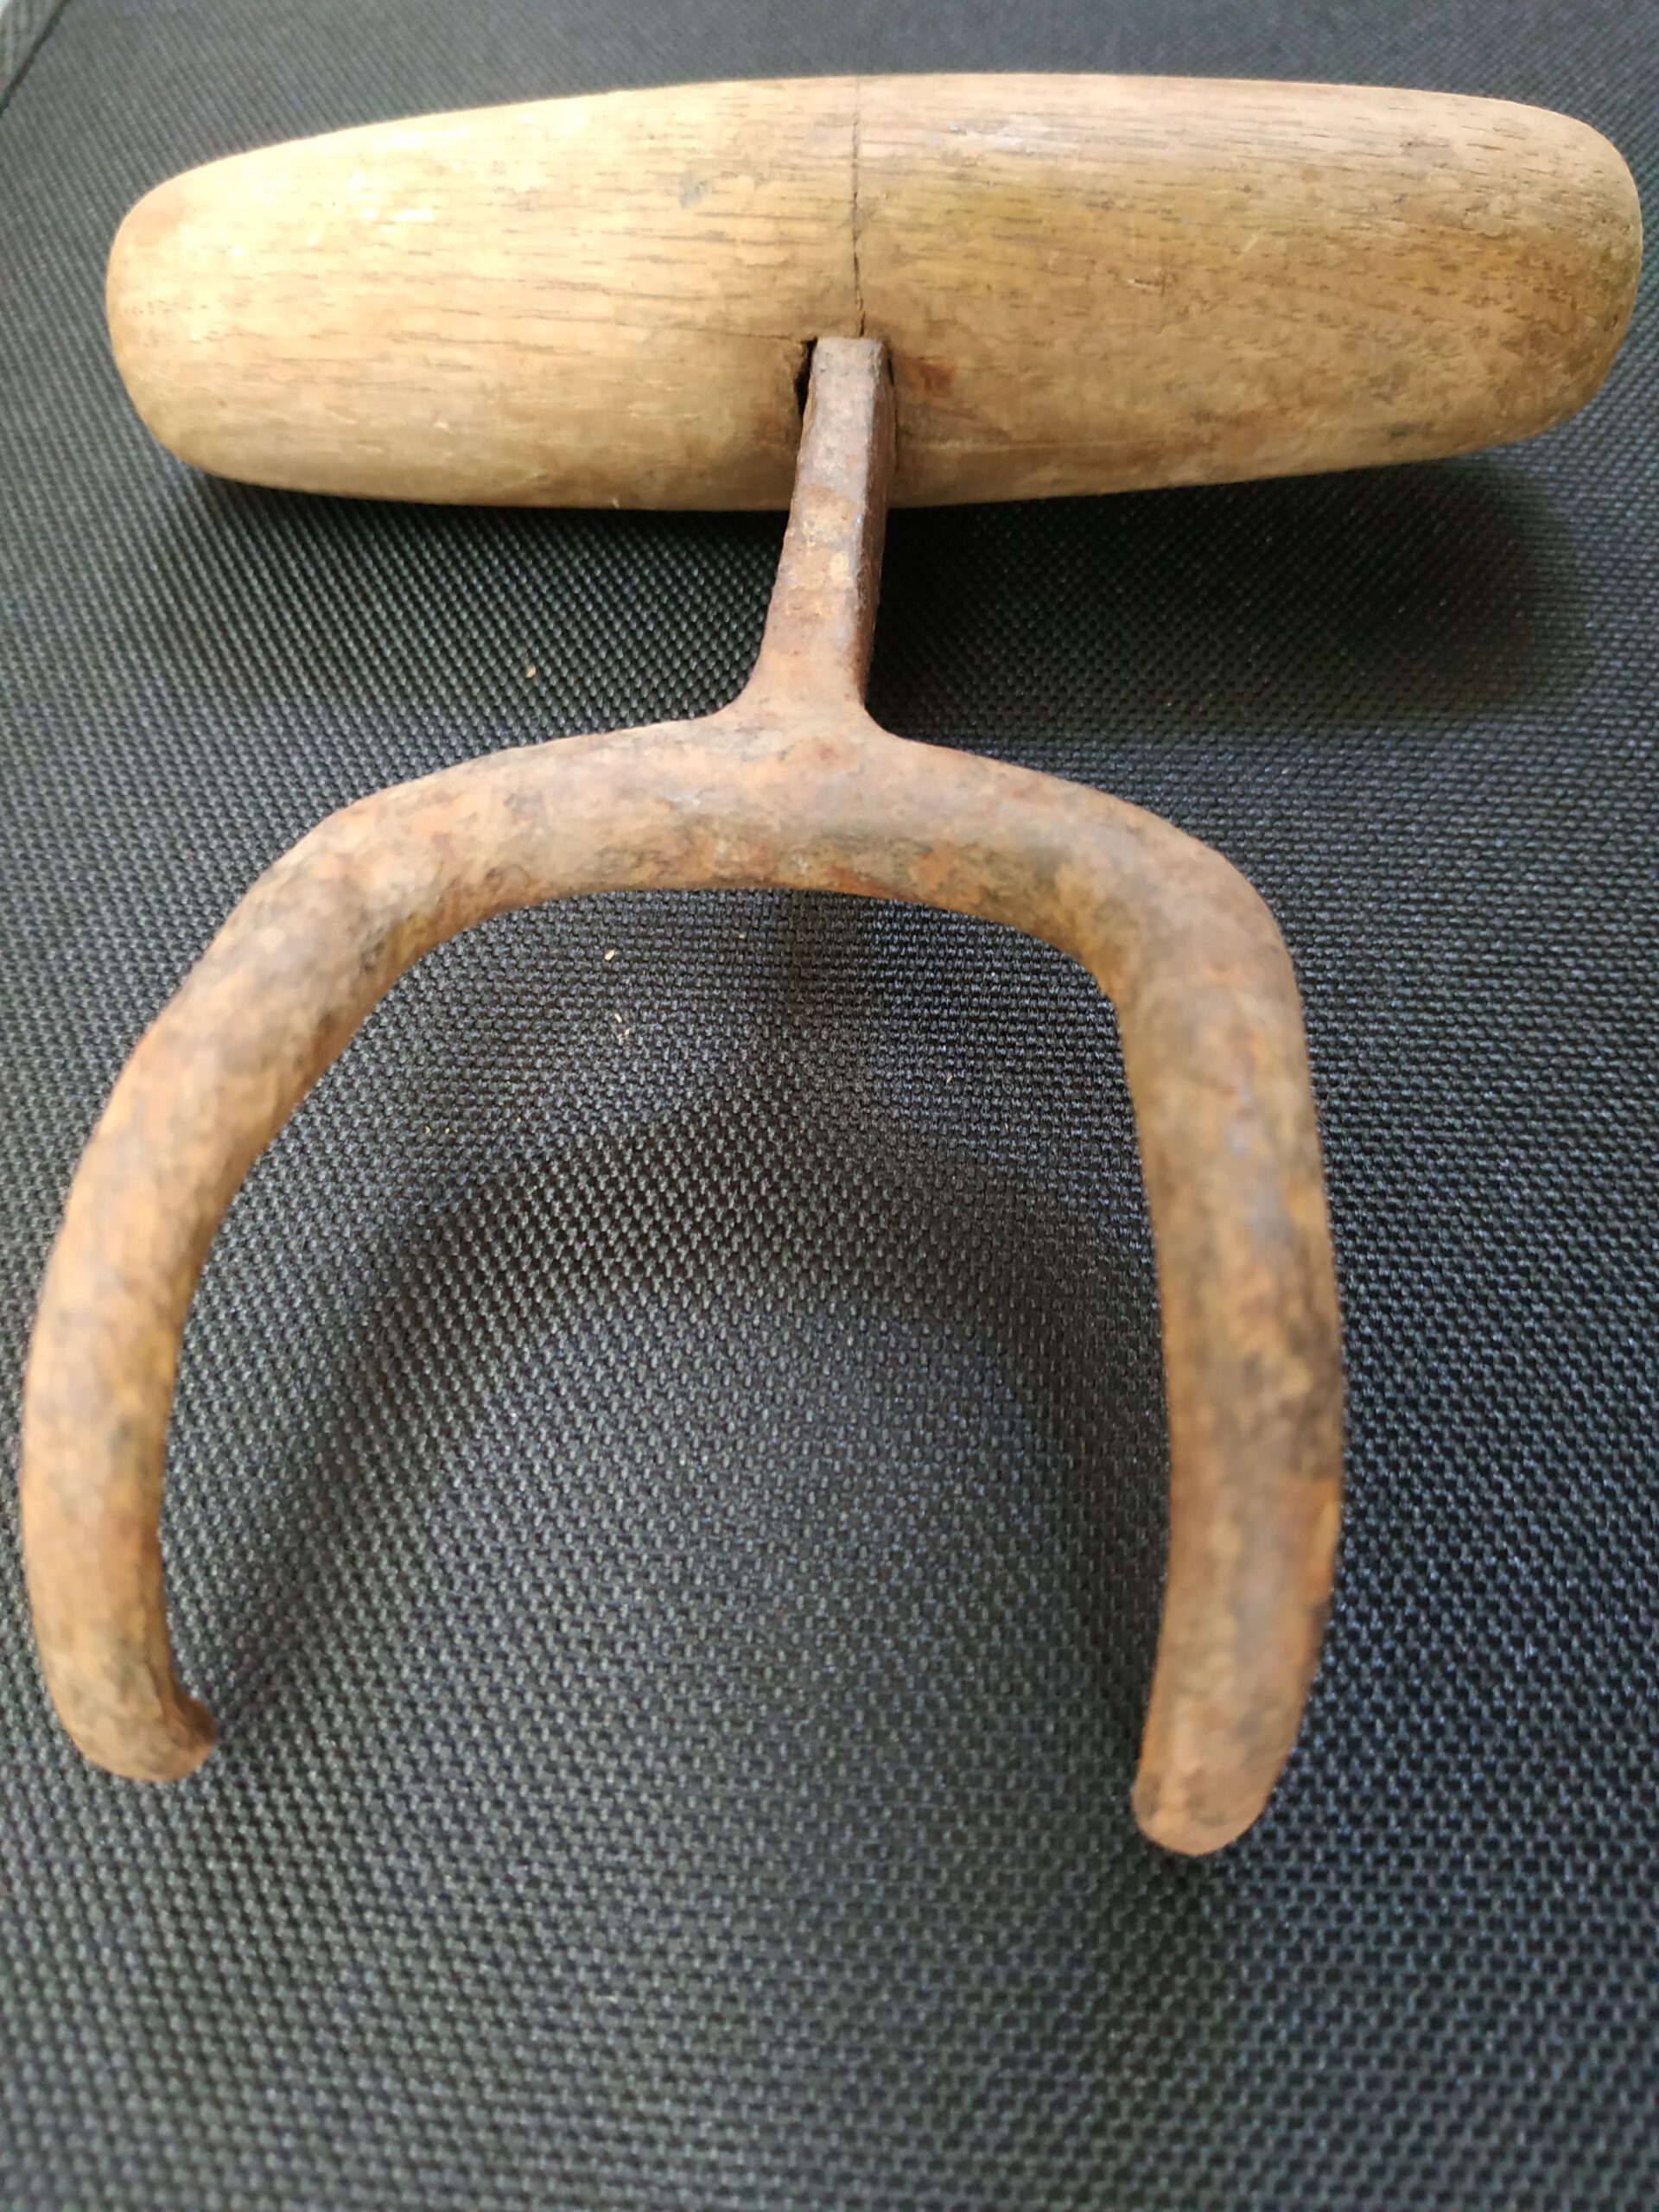 Wool Bale Hook likelu from the 60s or 70s